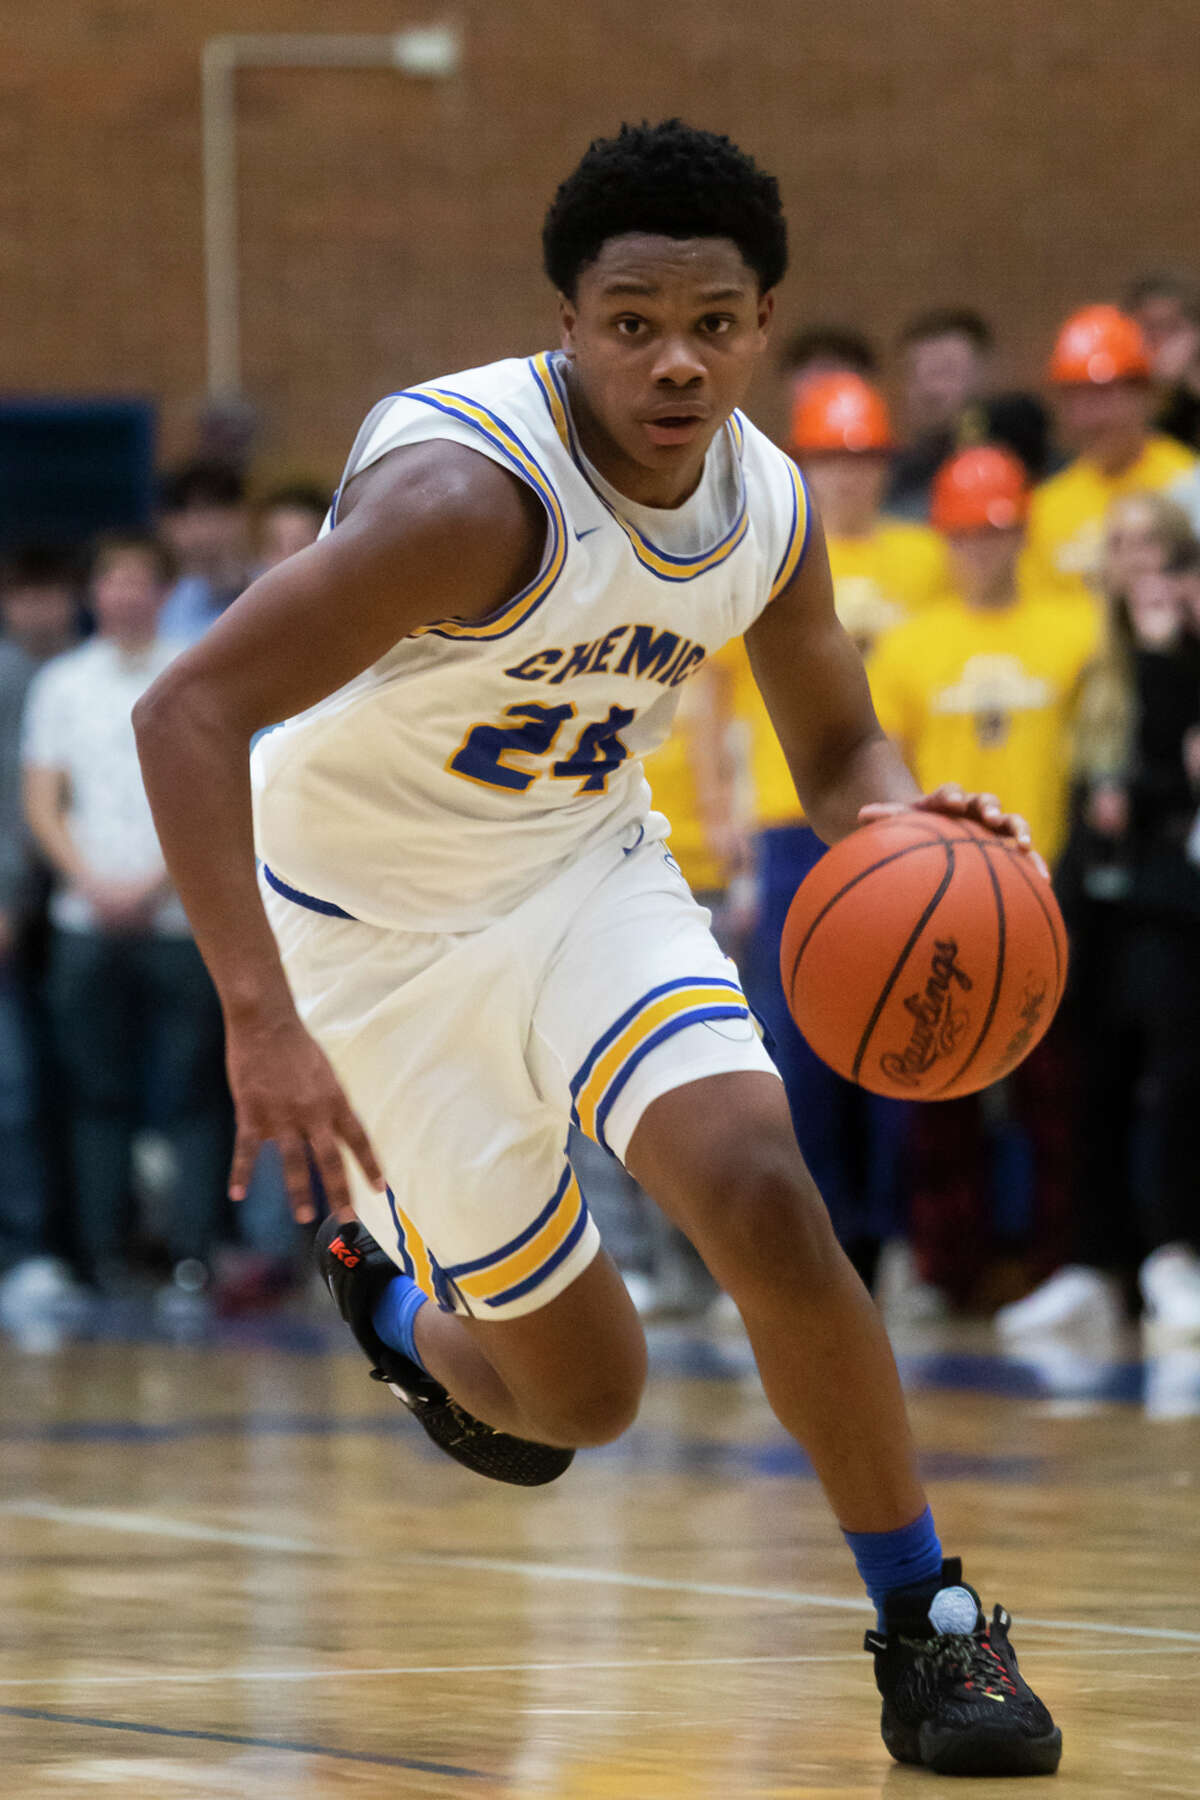 Midland's Jason Davenport dribbles down the court during the Chemics' game against Mt. Pleasant Tuesday, Dec. 7, 2021 at Midland High School.